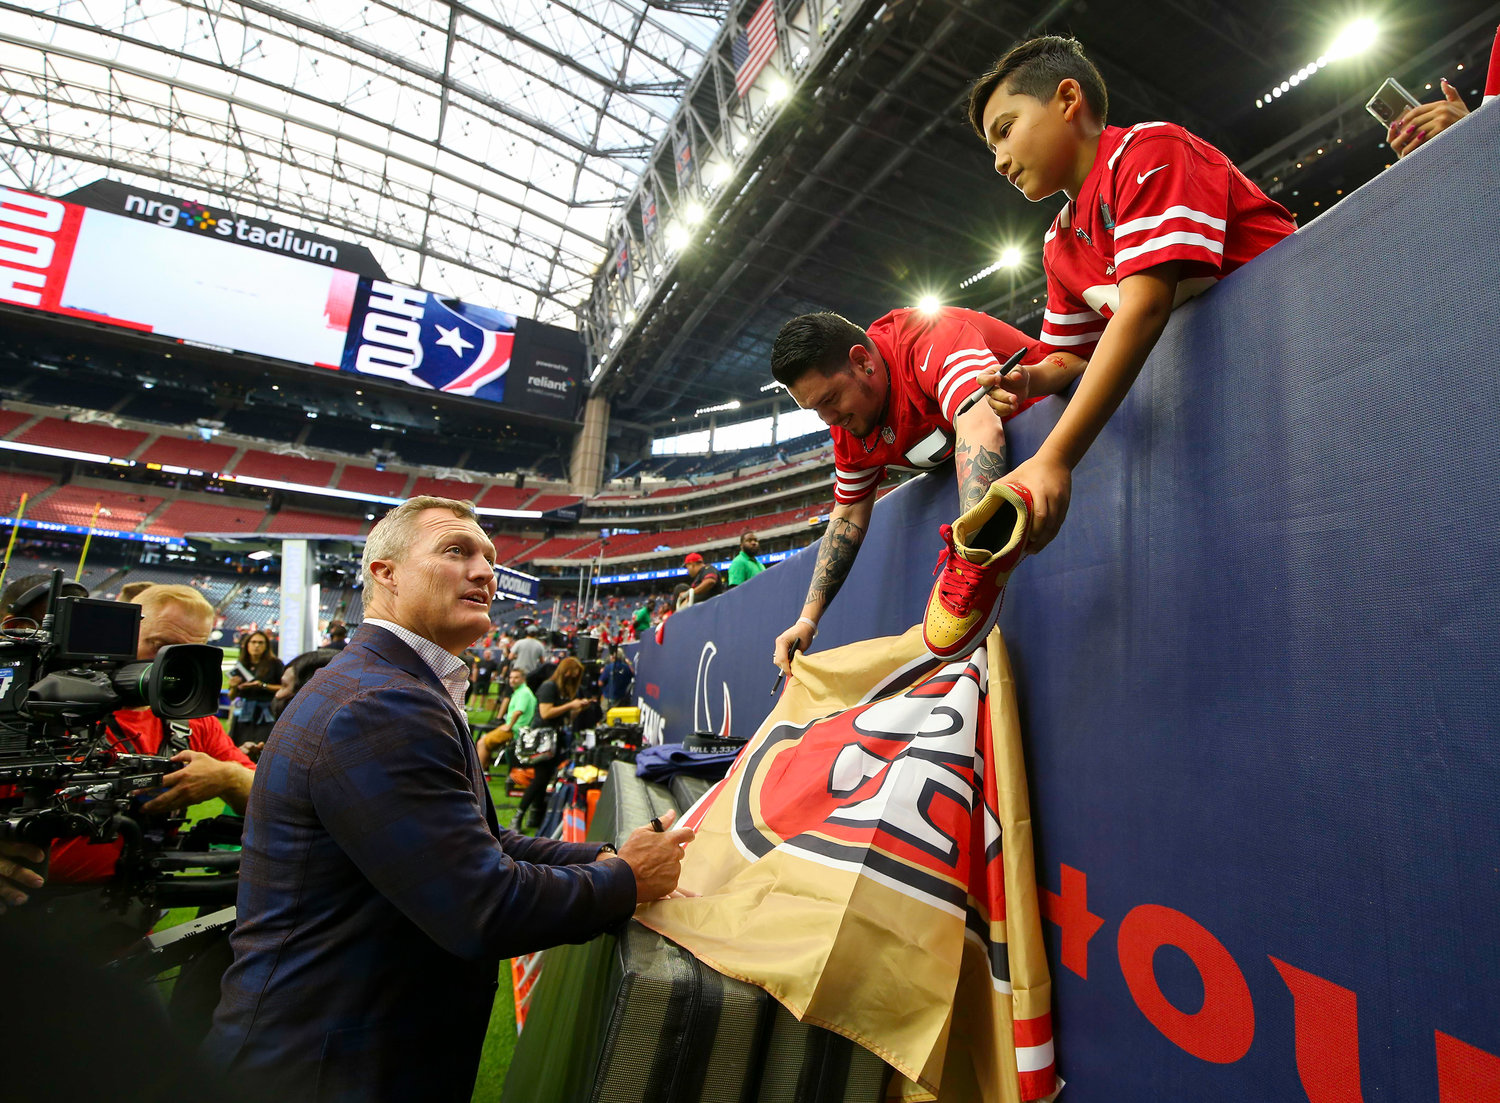 San Francisco 49ers General Manager John Lynch signs autographs before the start of an NFL preseason game between the Texans and the 49ers in Houston, Texas, on August 25, 2022.